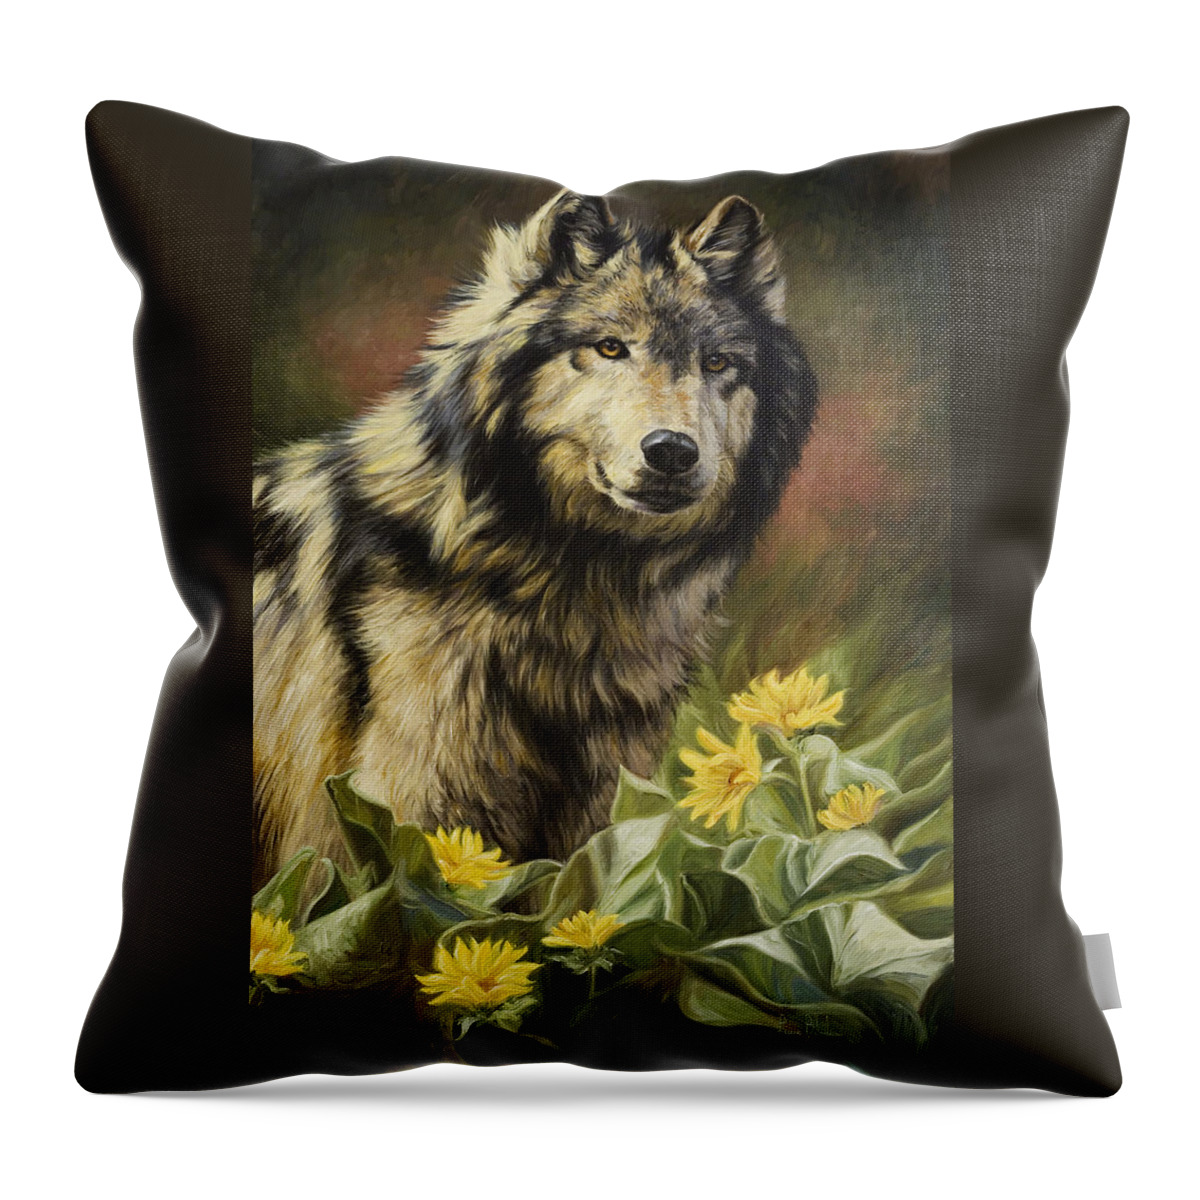 Wolf Throw Pillow featuring the painting Wild Spirit by Lucie Bilodeau